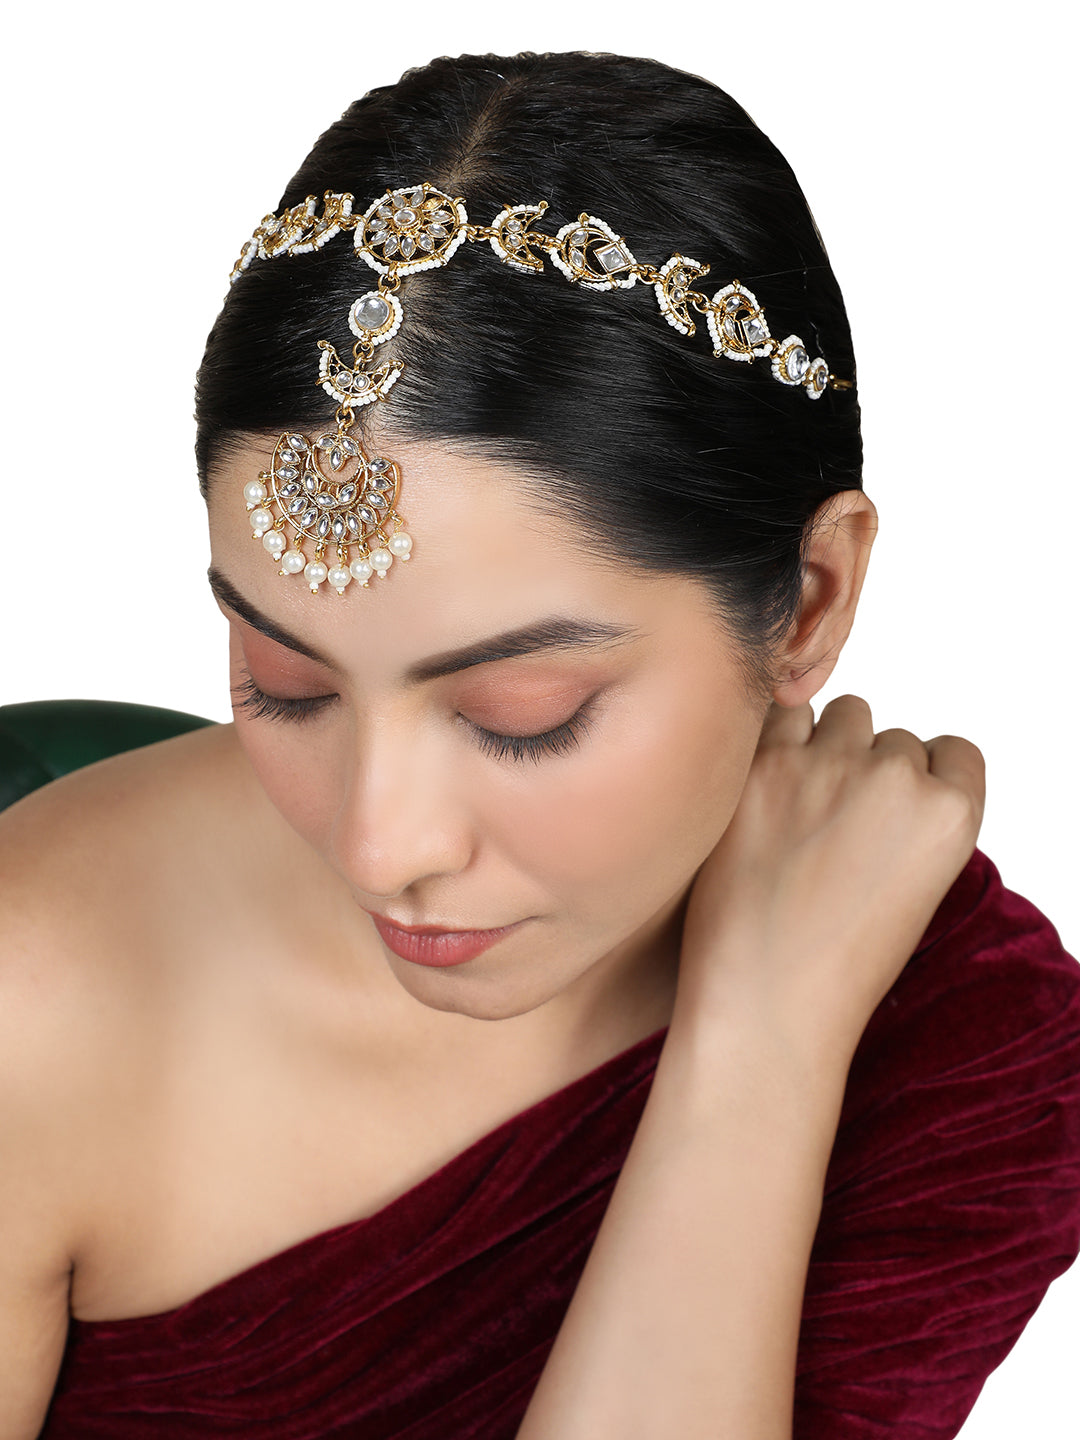 Women's/Girls Ethnic Gold Plated Stone Studded With Pearl Drop Floral Shaped Maangtikka- Mode Mania